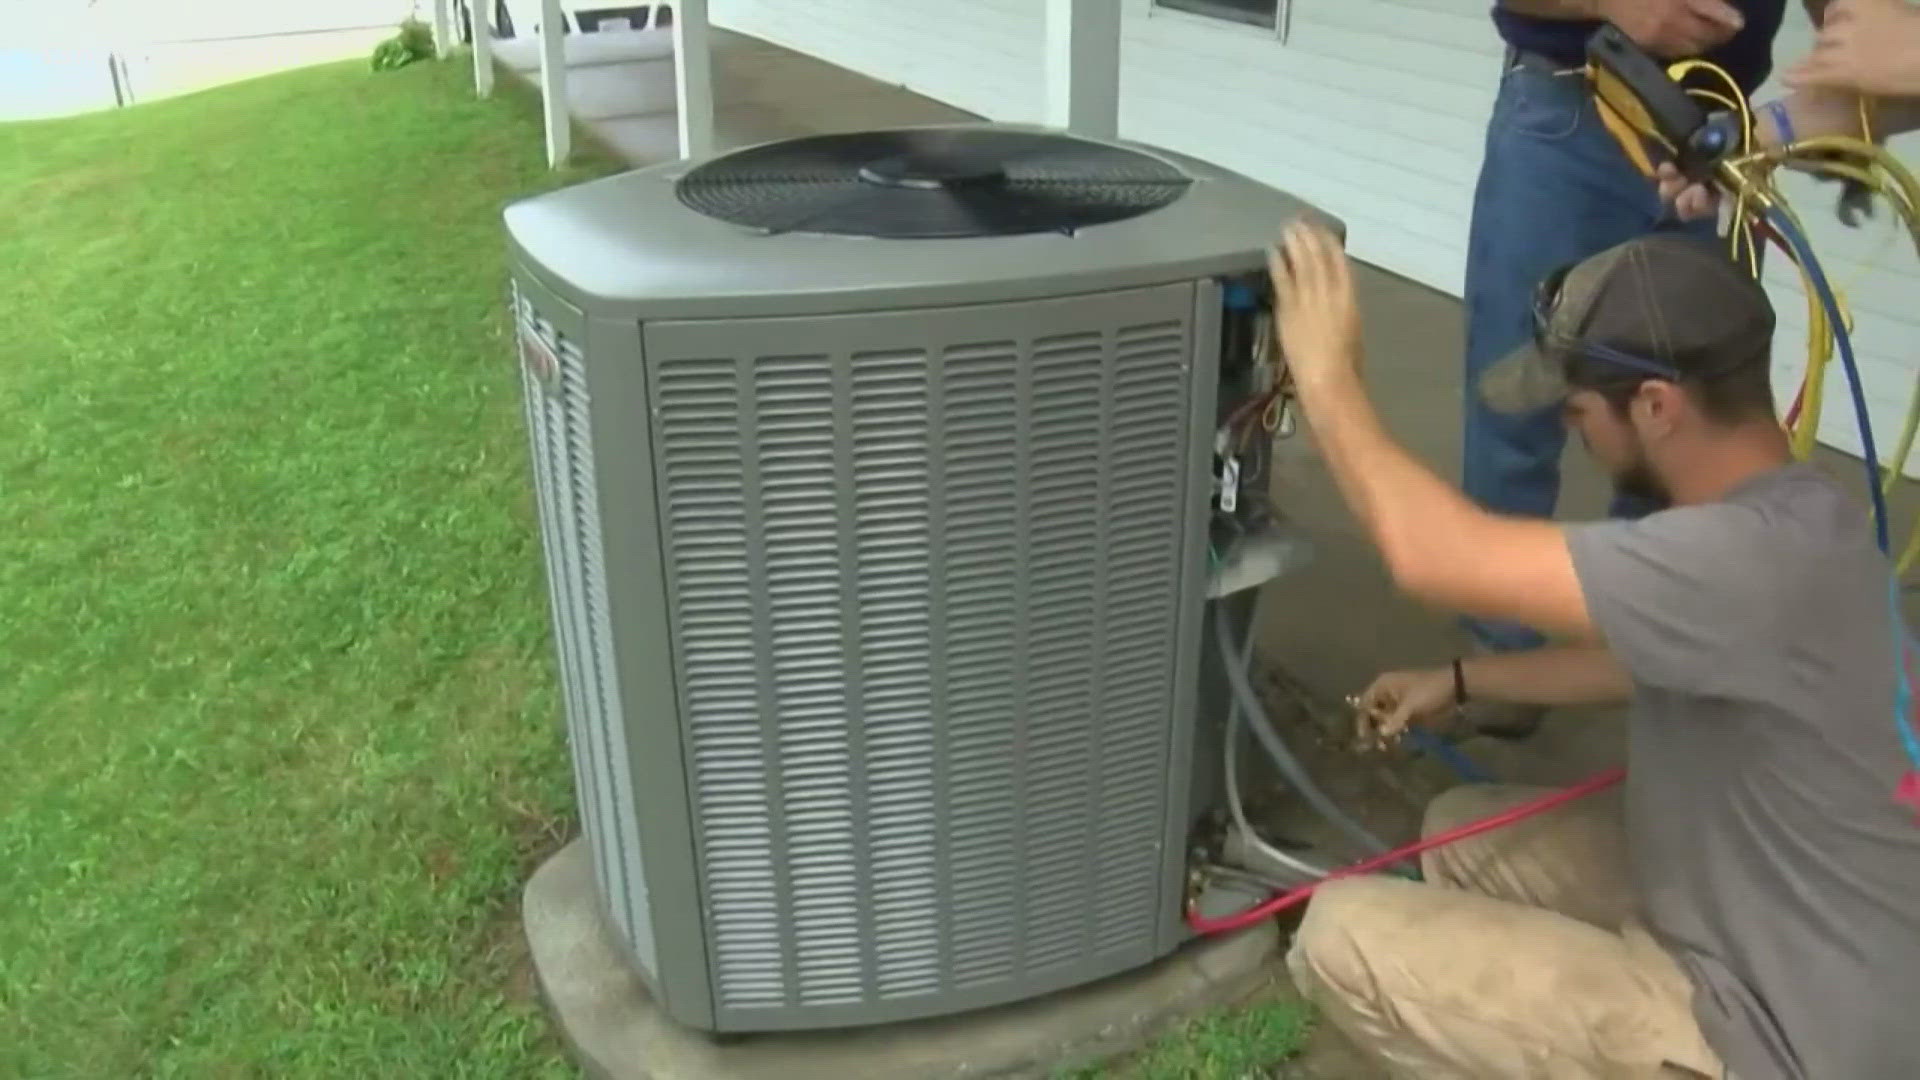 As extreme heat permeates the forecast across Hampton Roads, home cooling systems are working overtime to keep people cool.